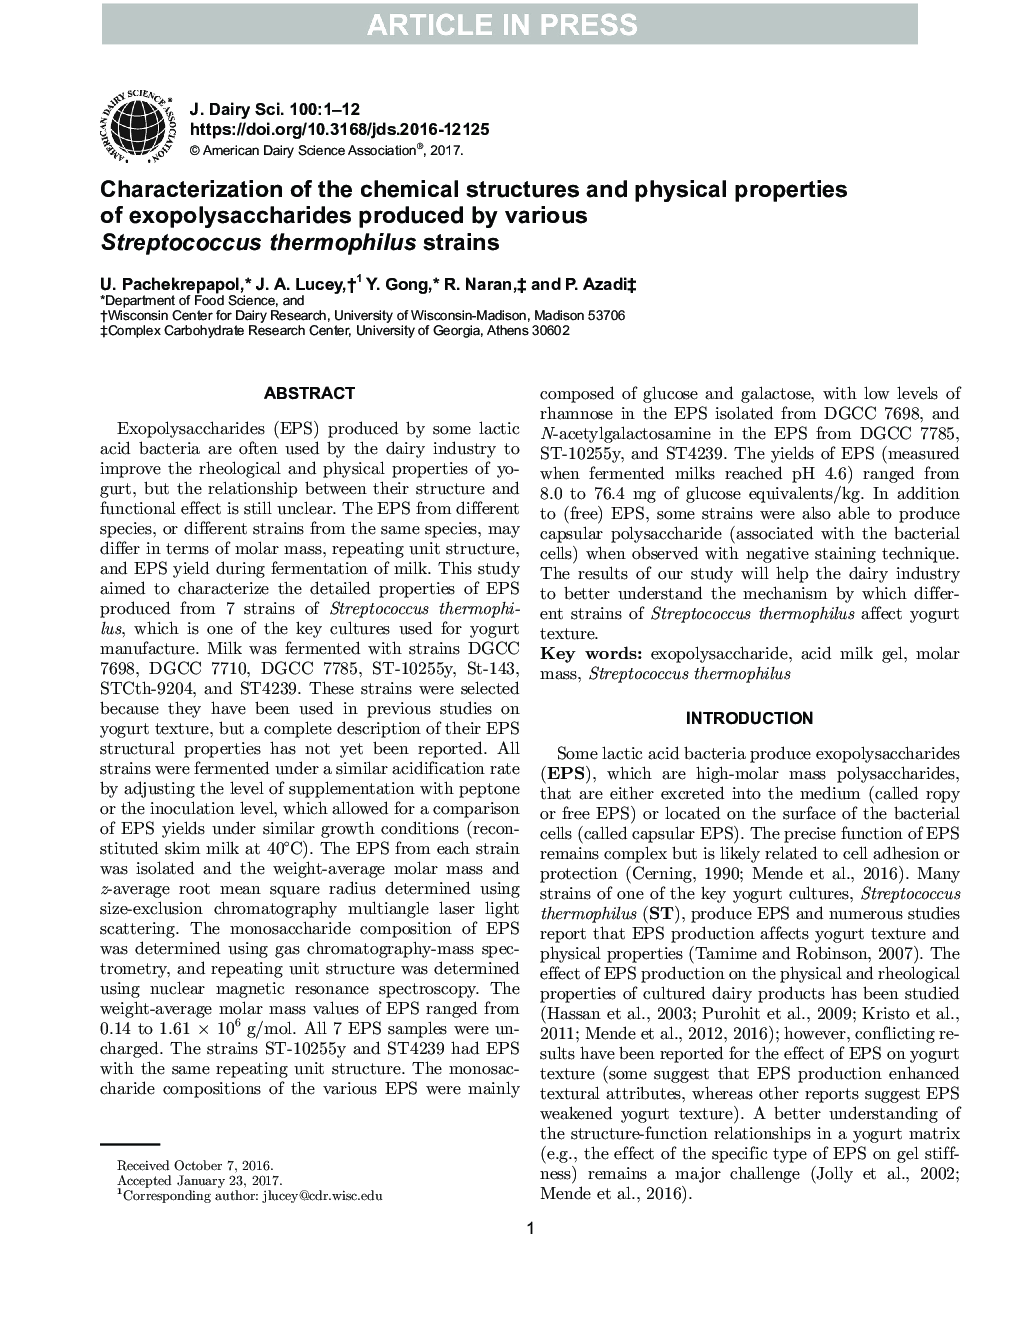 Characterization of the chemical structures and physical properties of exopolysaccharides produced by various Streptococcus thermophilus strains